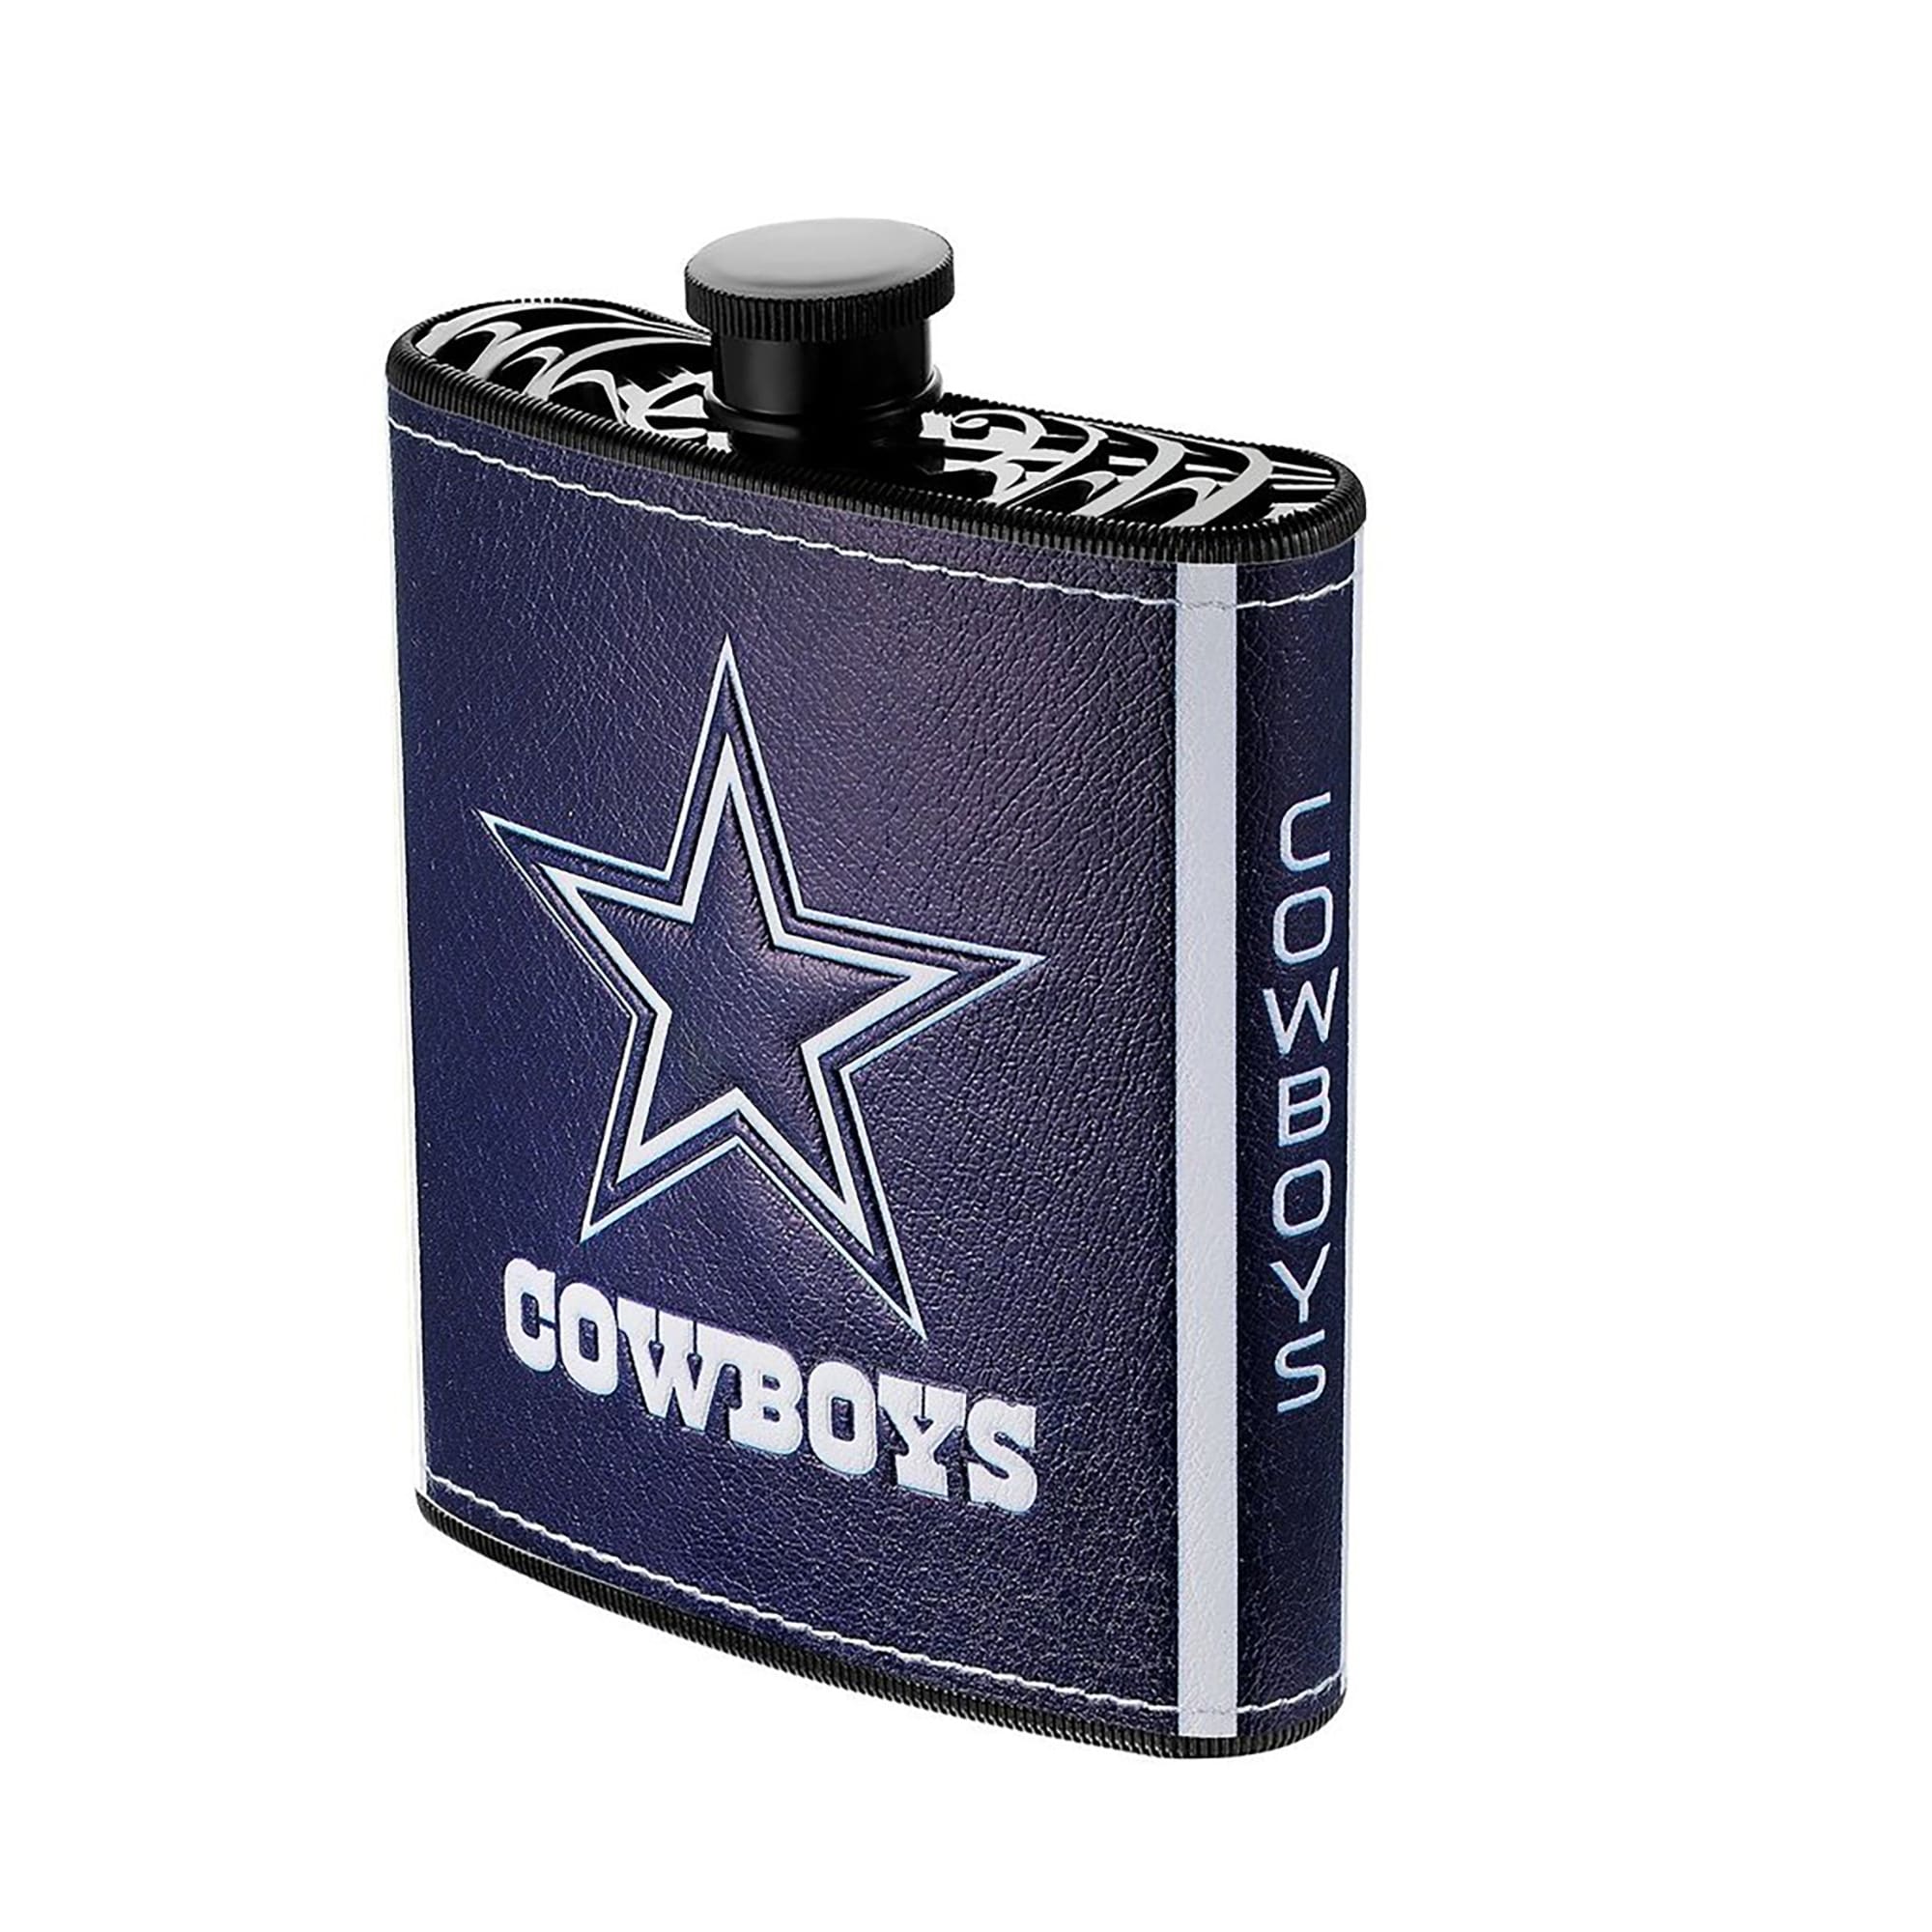 https://ak1.ostkcdn.com/images/products/is/images/direct/6266dca6eeaa46e28969a045420928c74266c158/NFL-2pc-Flask-with-Funnel%2C-7oz%2C-Dallas-Cowboys.jpg